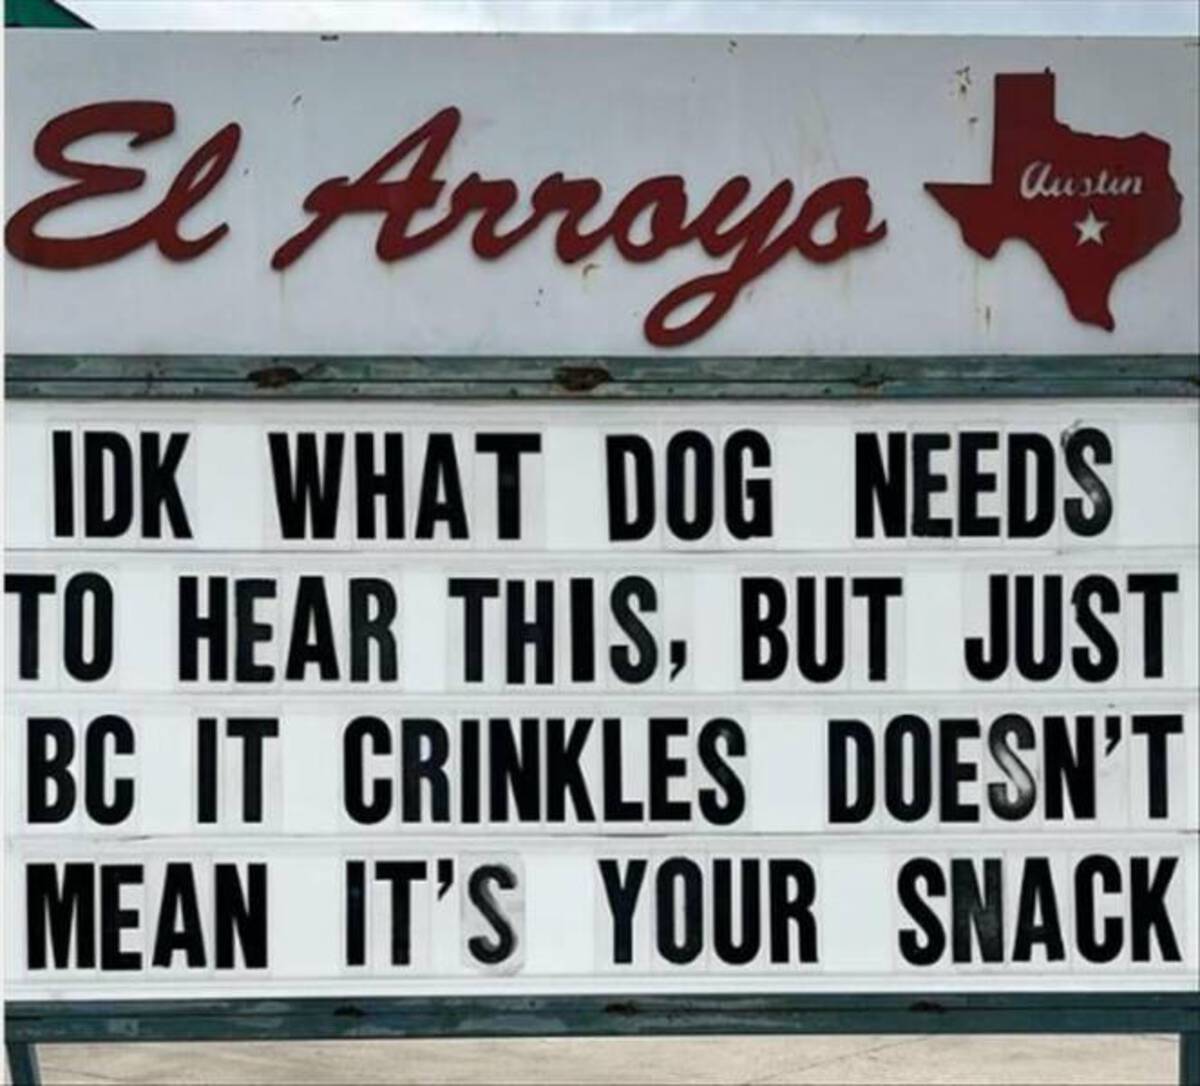 signage - El Arroyo Austin Idk What Dog Needs To Hear This, But Just Bc It Crinkles Doesn'T Mean It'S Your Snack